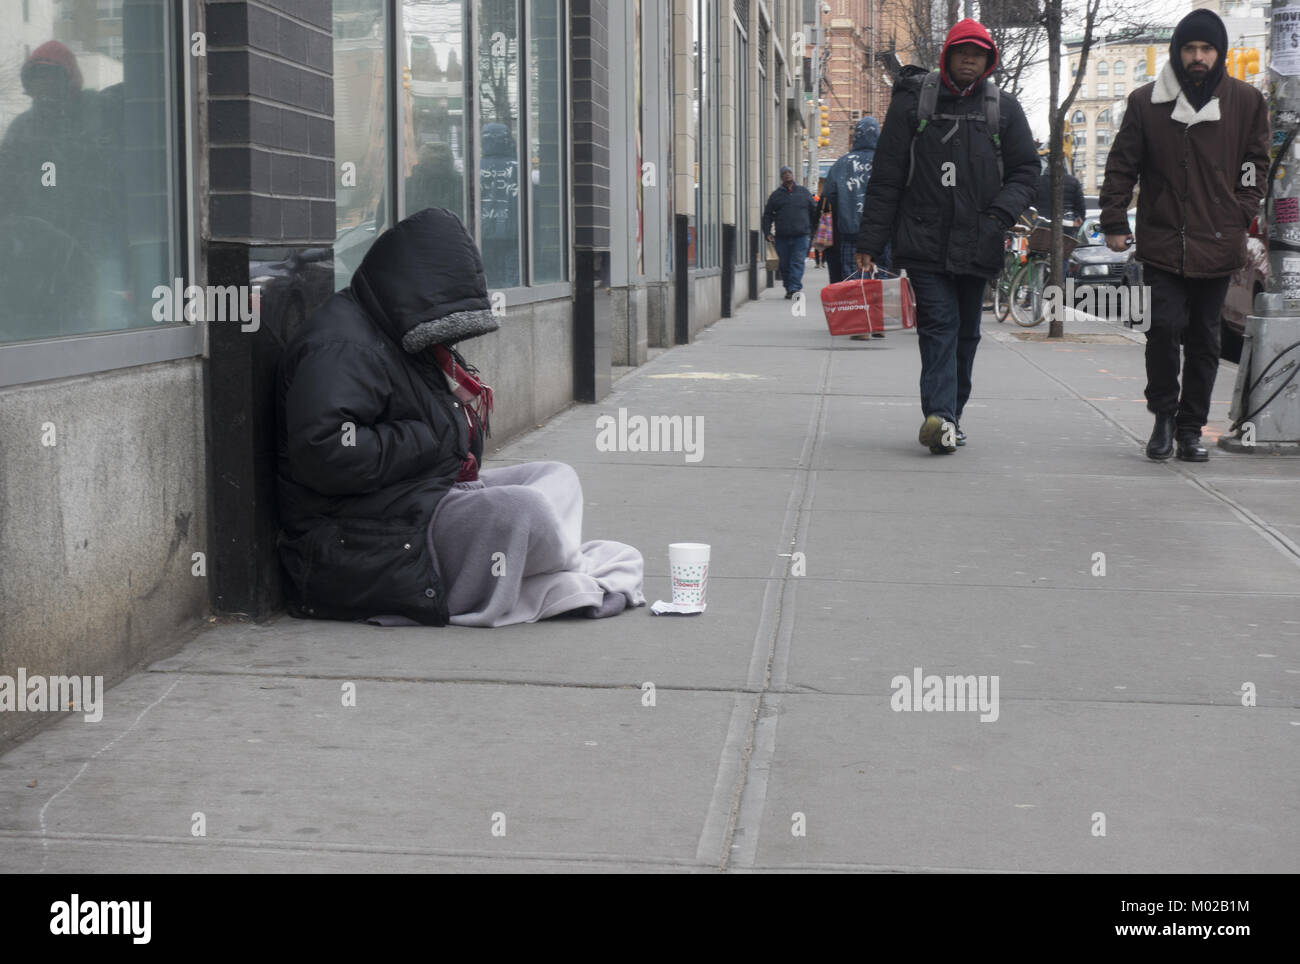 Homeless person sitting on the sidewalk asking for money in midtown Manhattan. Stock Photo